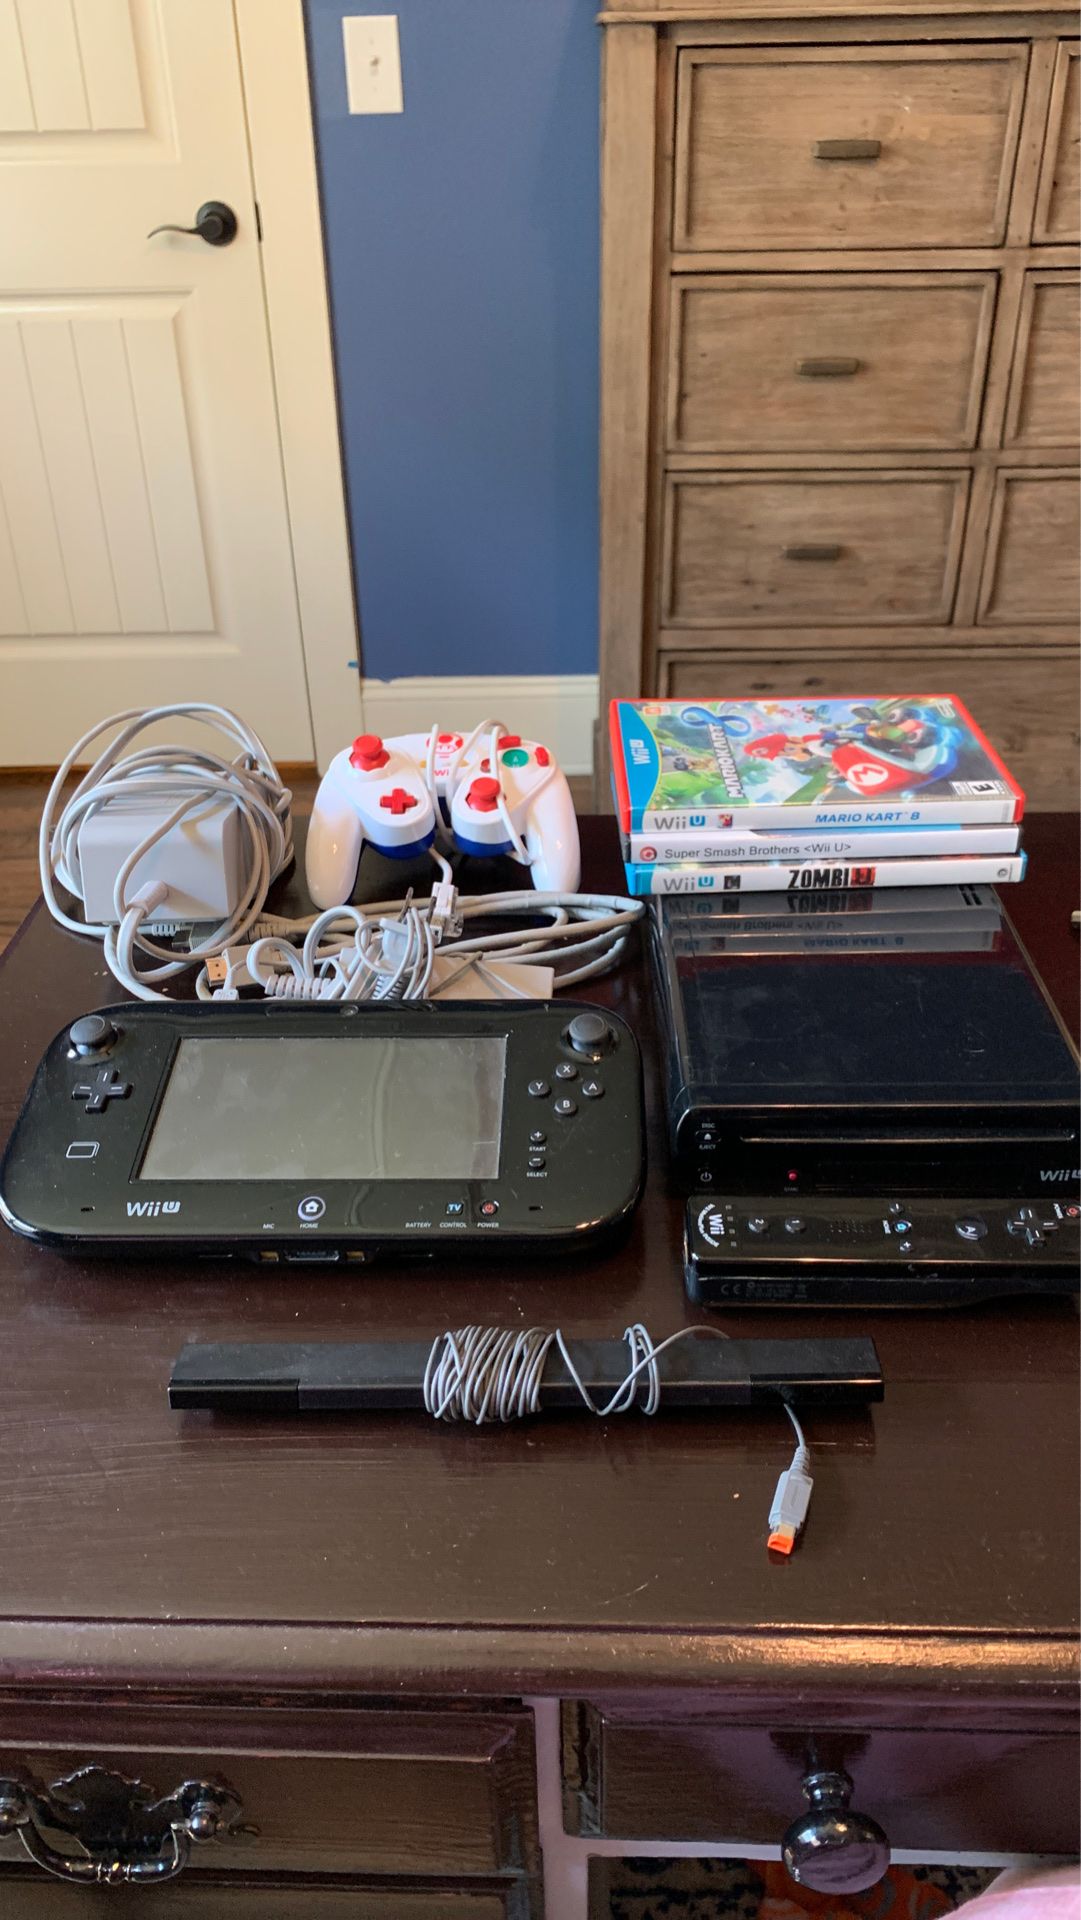 Wii U 32GB with Mario Kart 8 and Super Smash Brothers, accessories